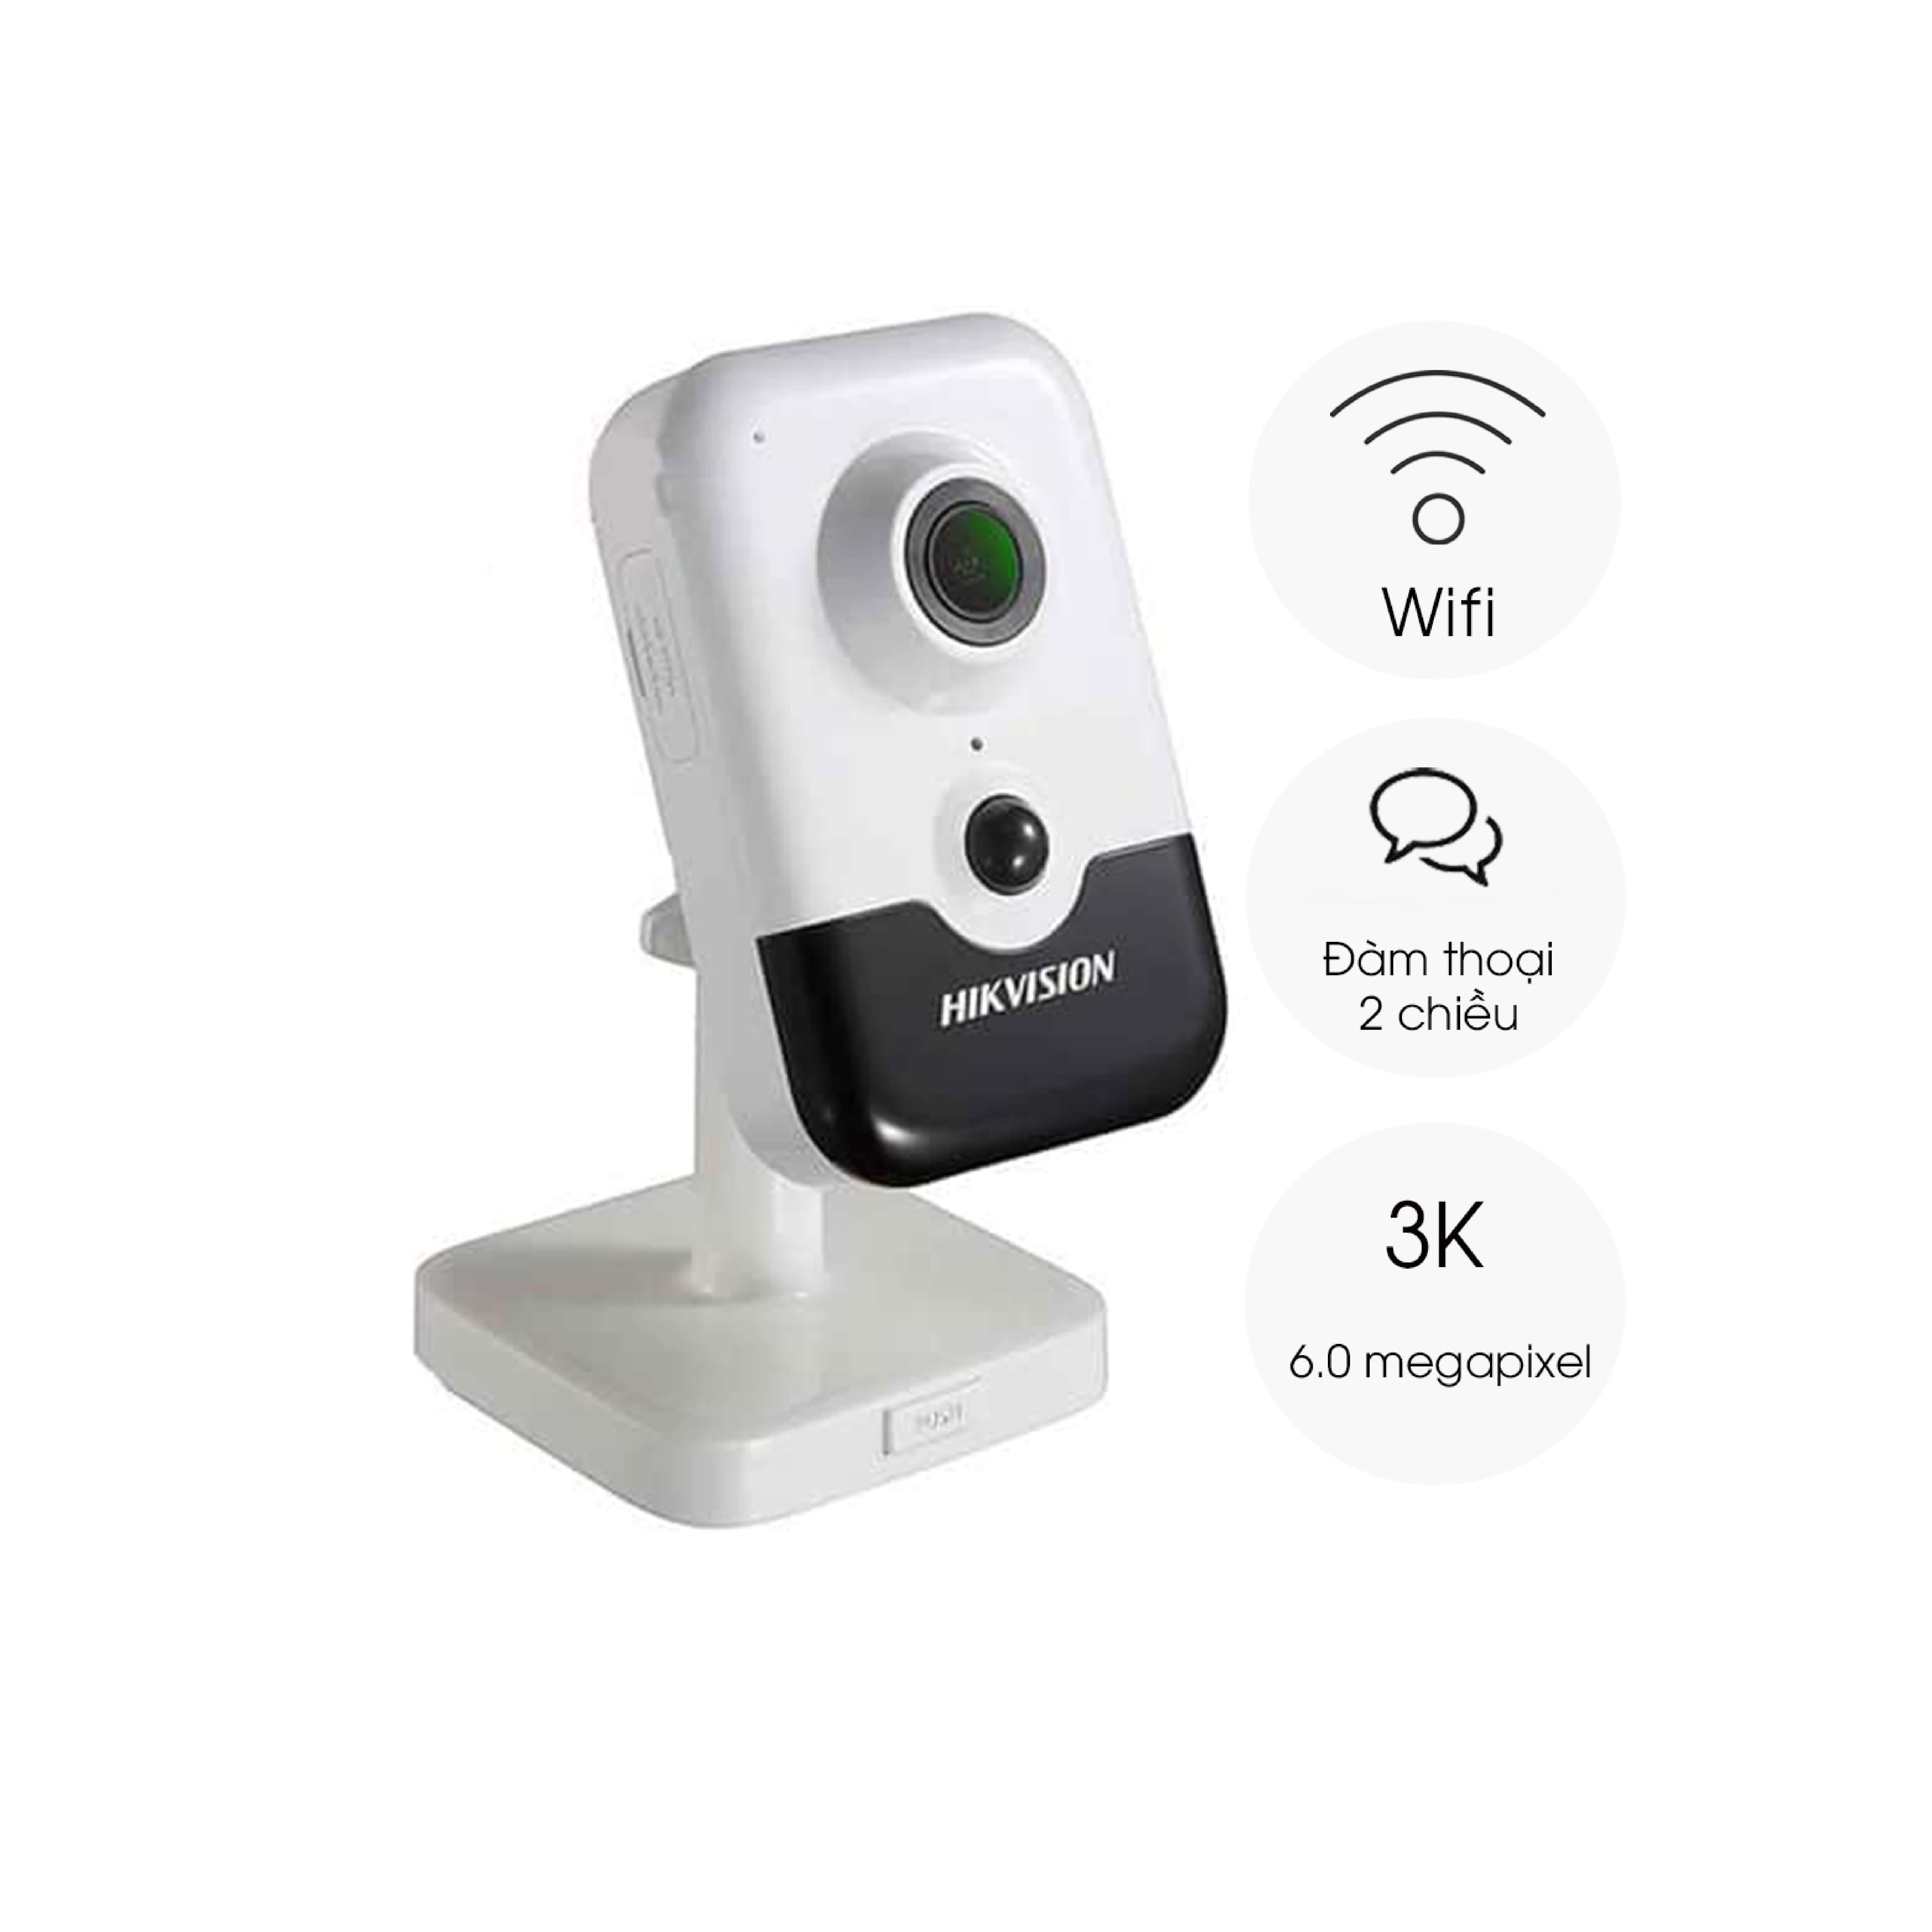 Mắt Camera IP/Wifi Hikvision DS-2CD2463G0-IW 6.0 Mpx lắp trong nhà